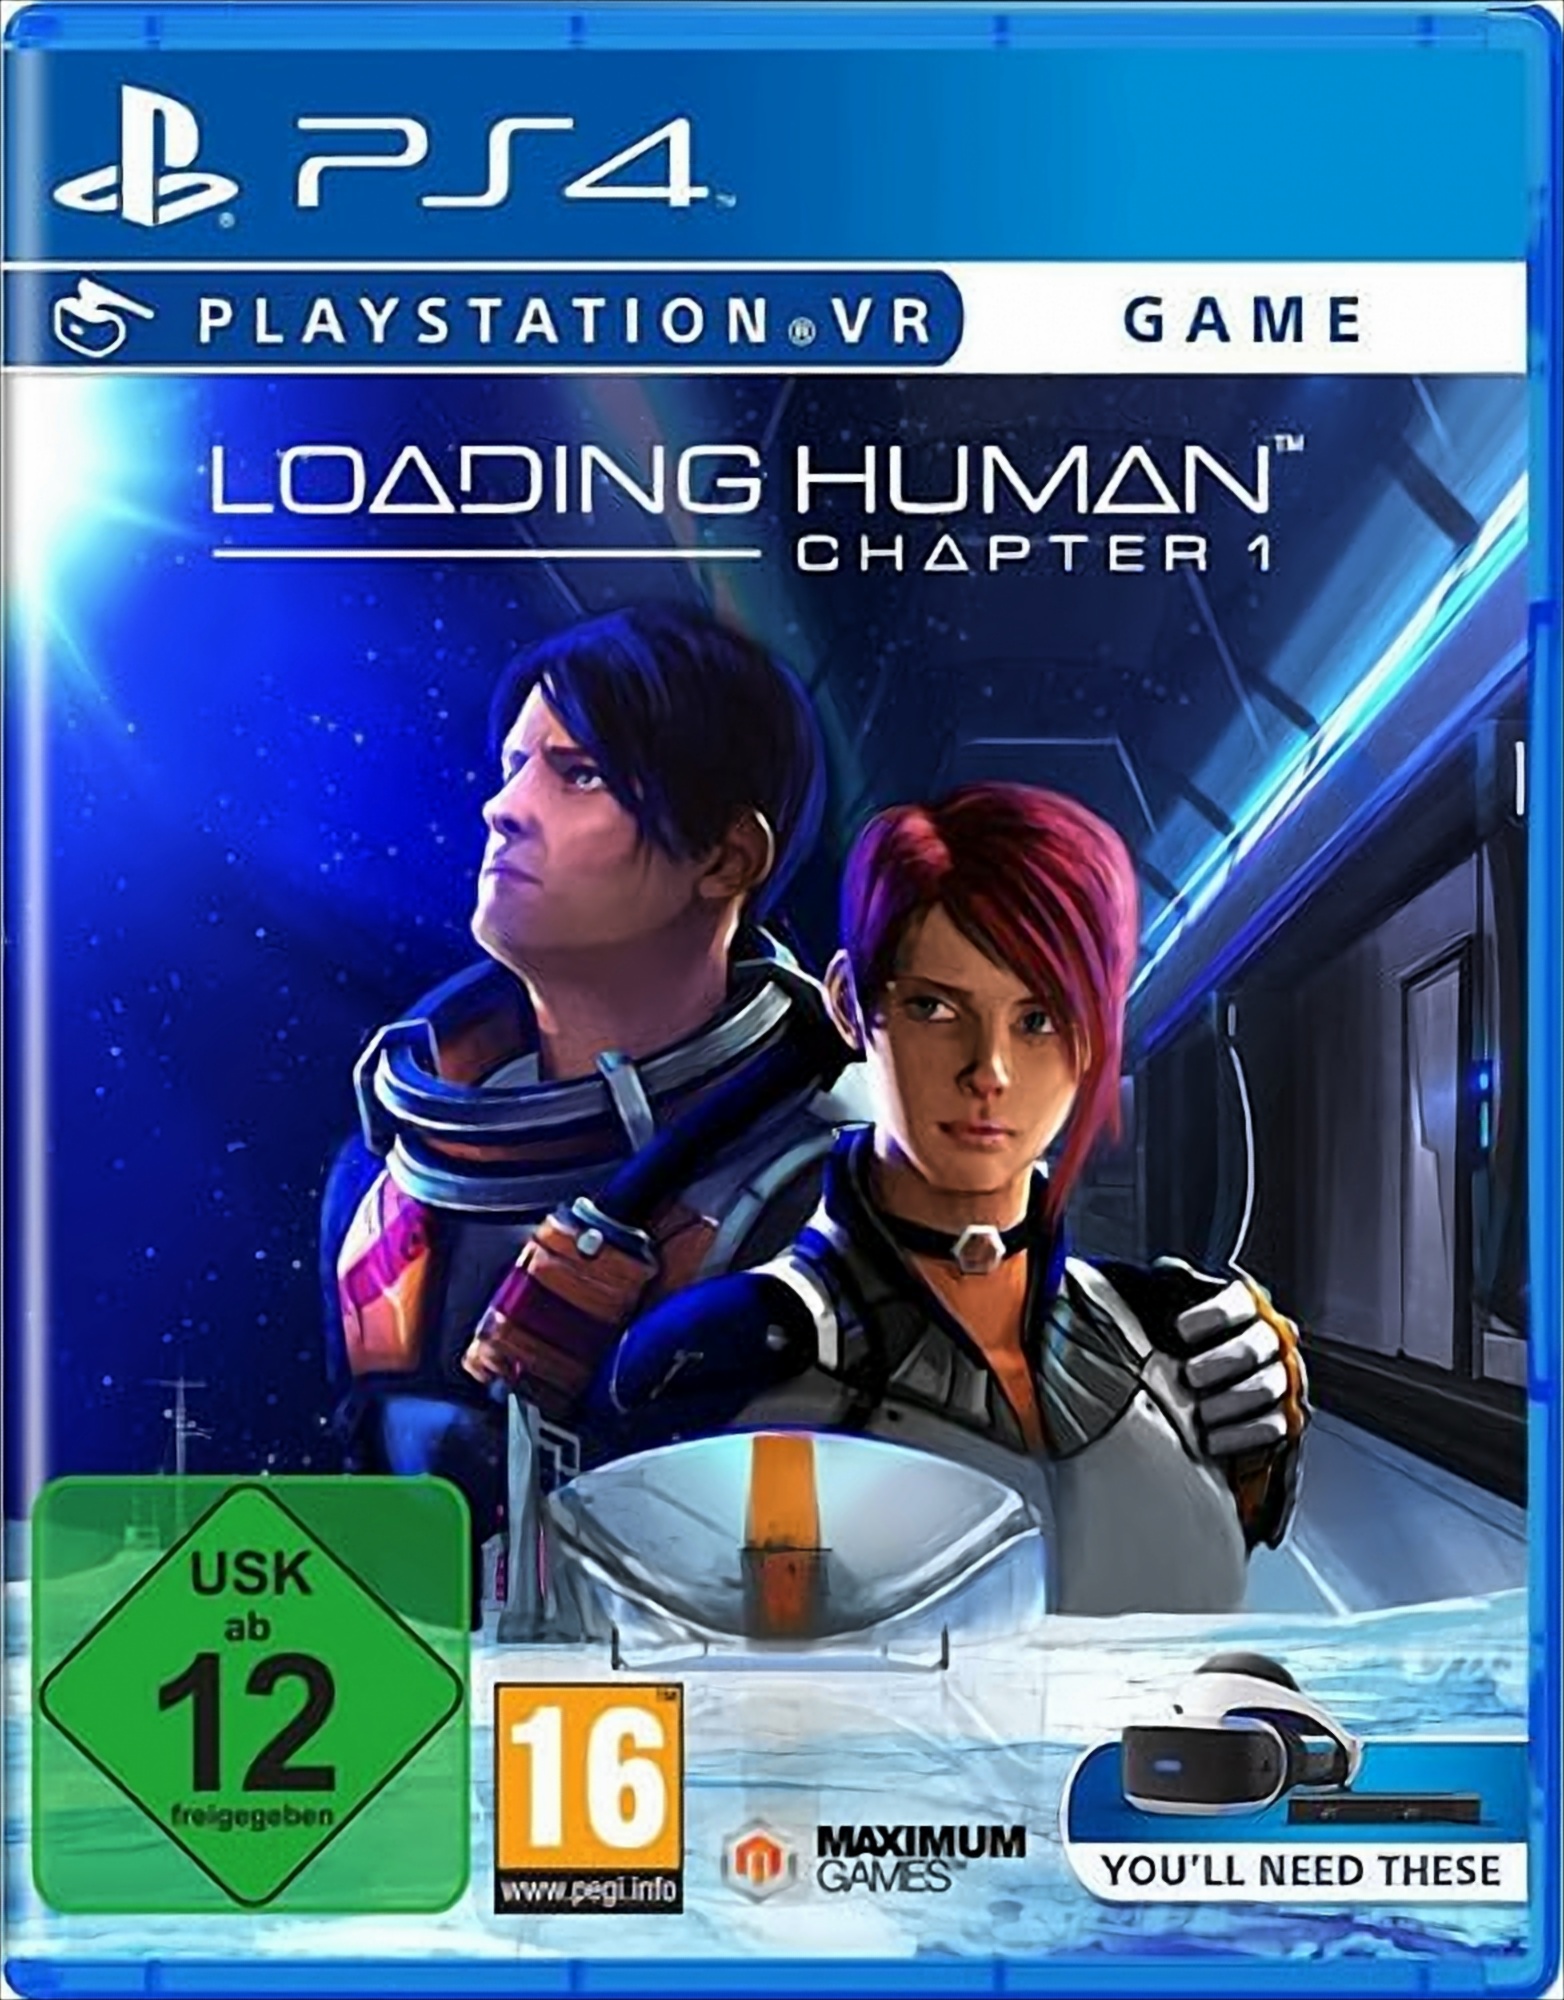 Loading Human (PlayStation VR only)